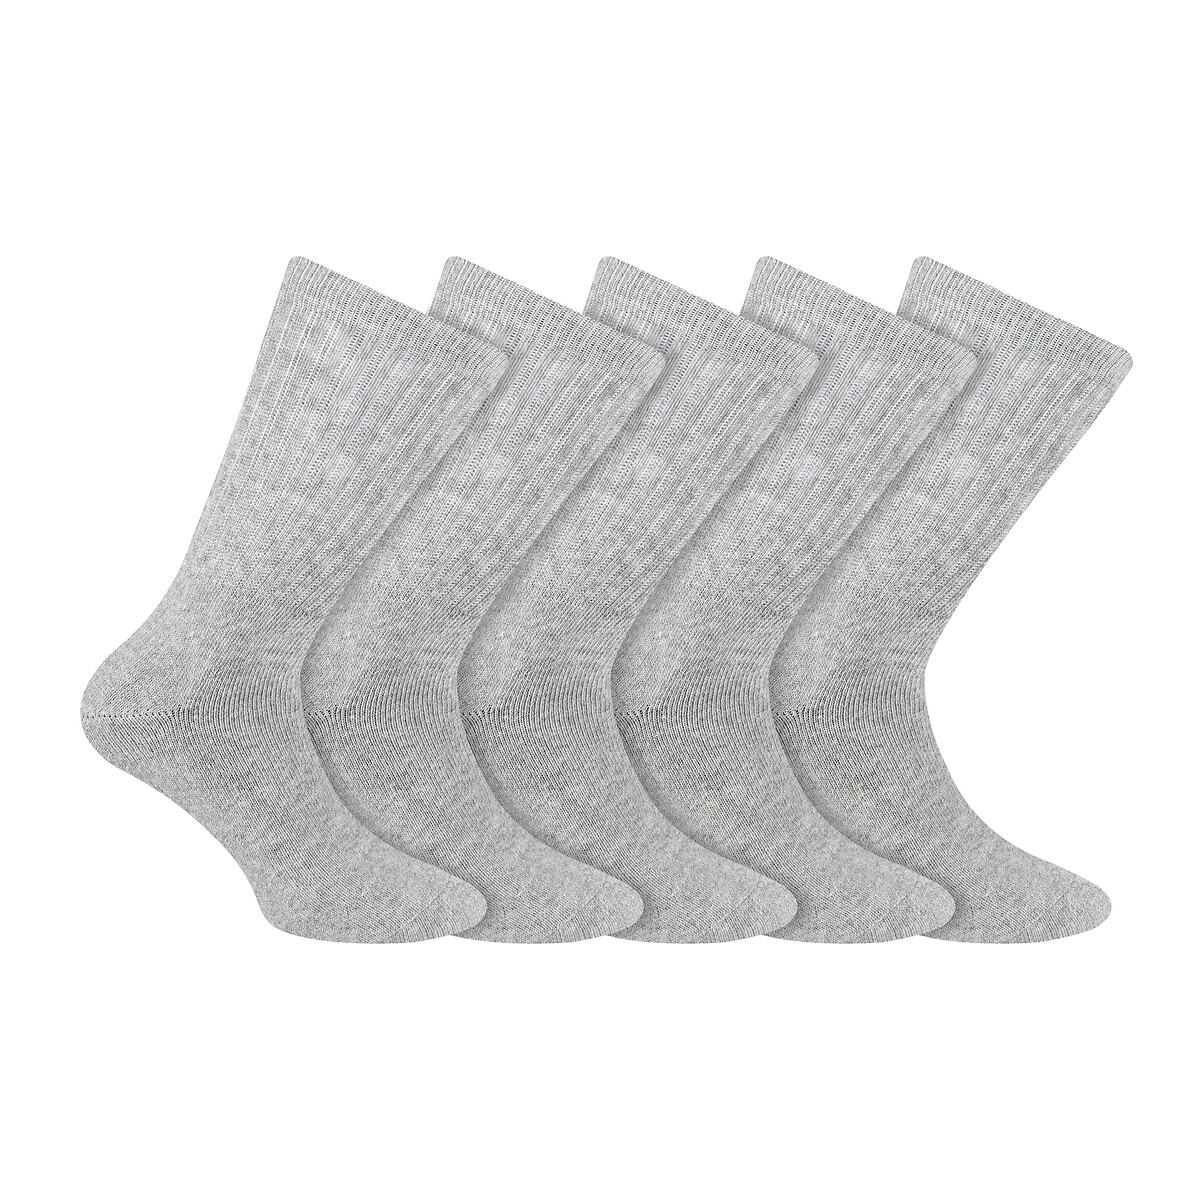 Image of Pack of 5 Pairs of Ecodim Sports Socks in Cotton Mix